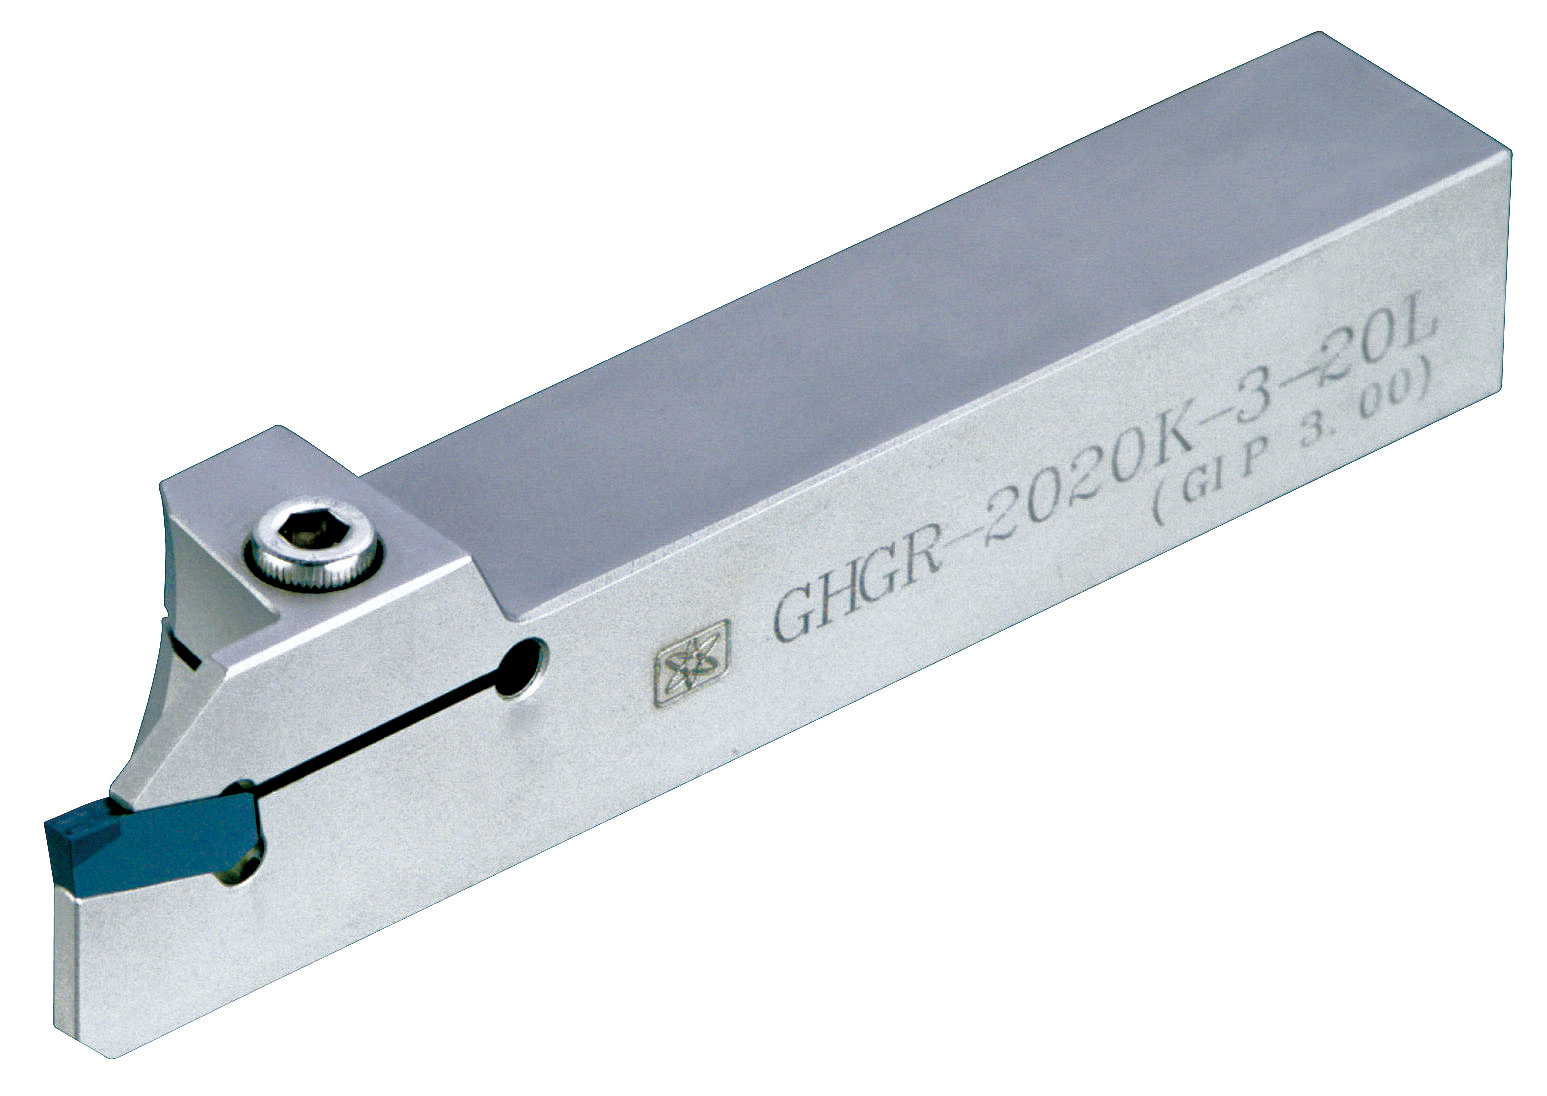 Products|GHGR (GIP / GIF / GIMF / GIMY) External Turning Tool Holders